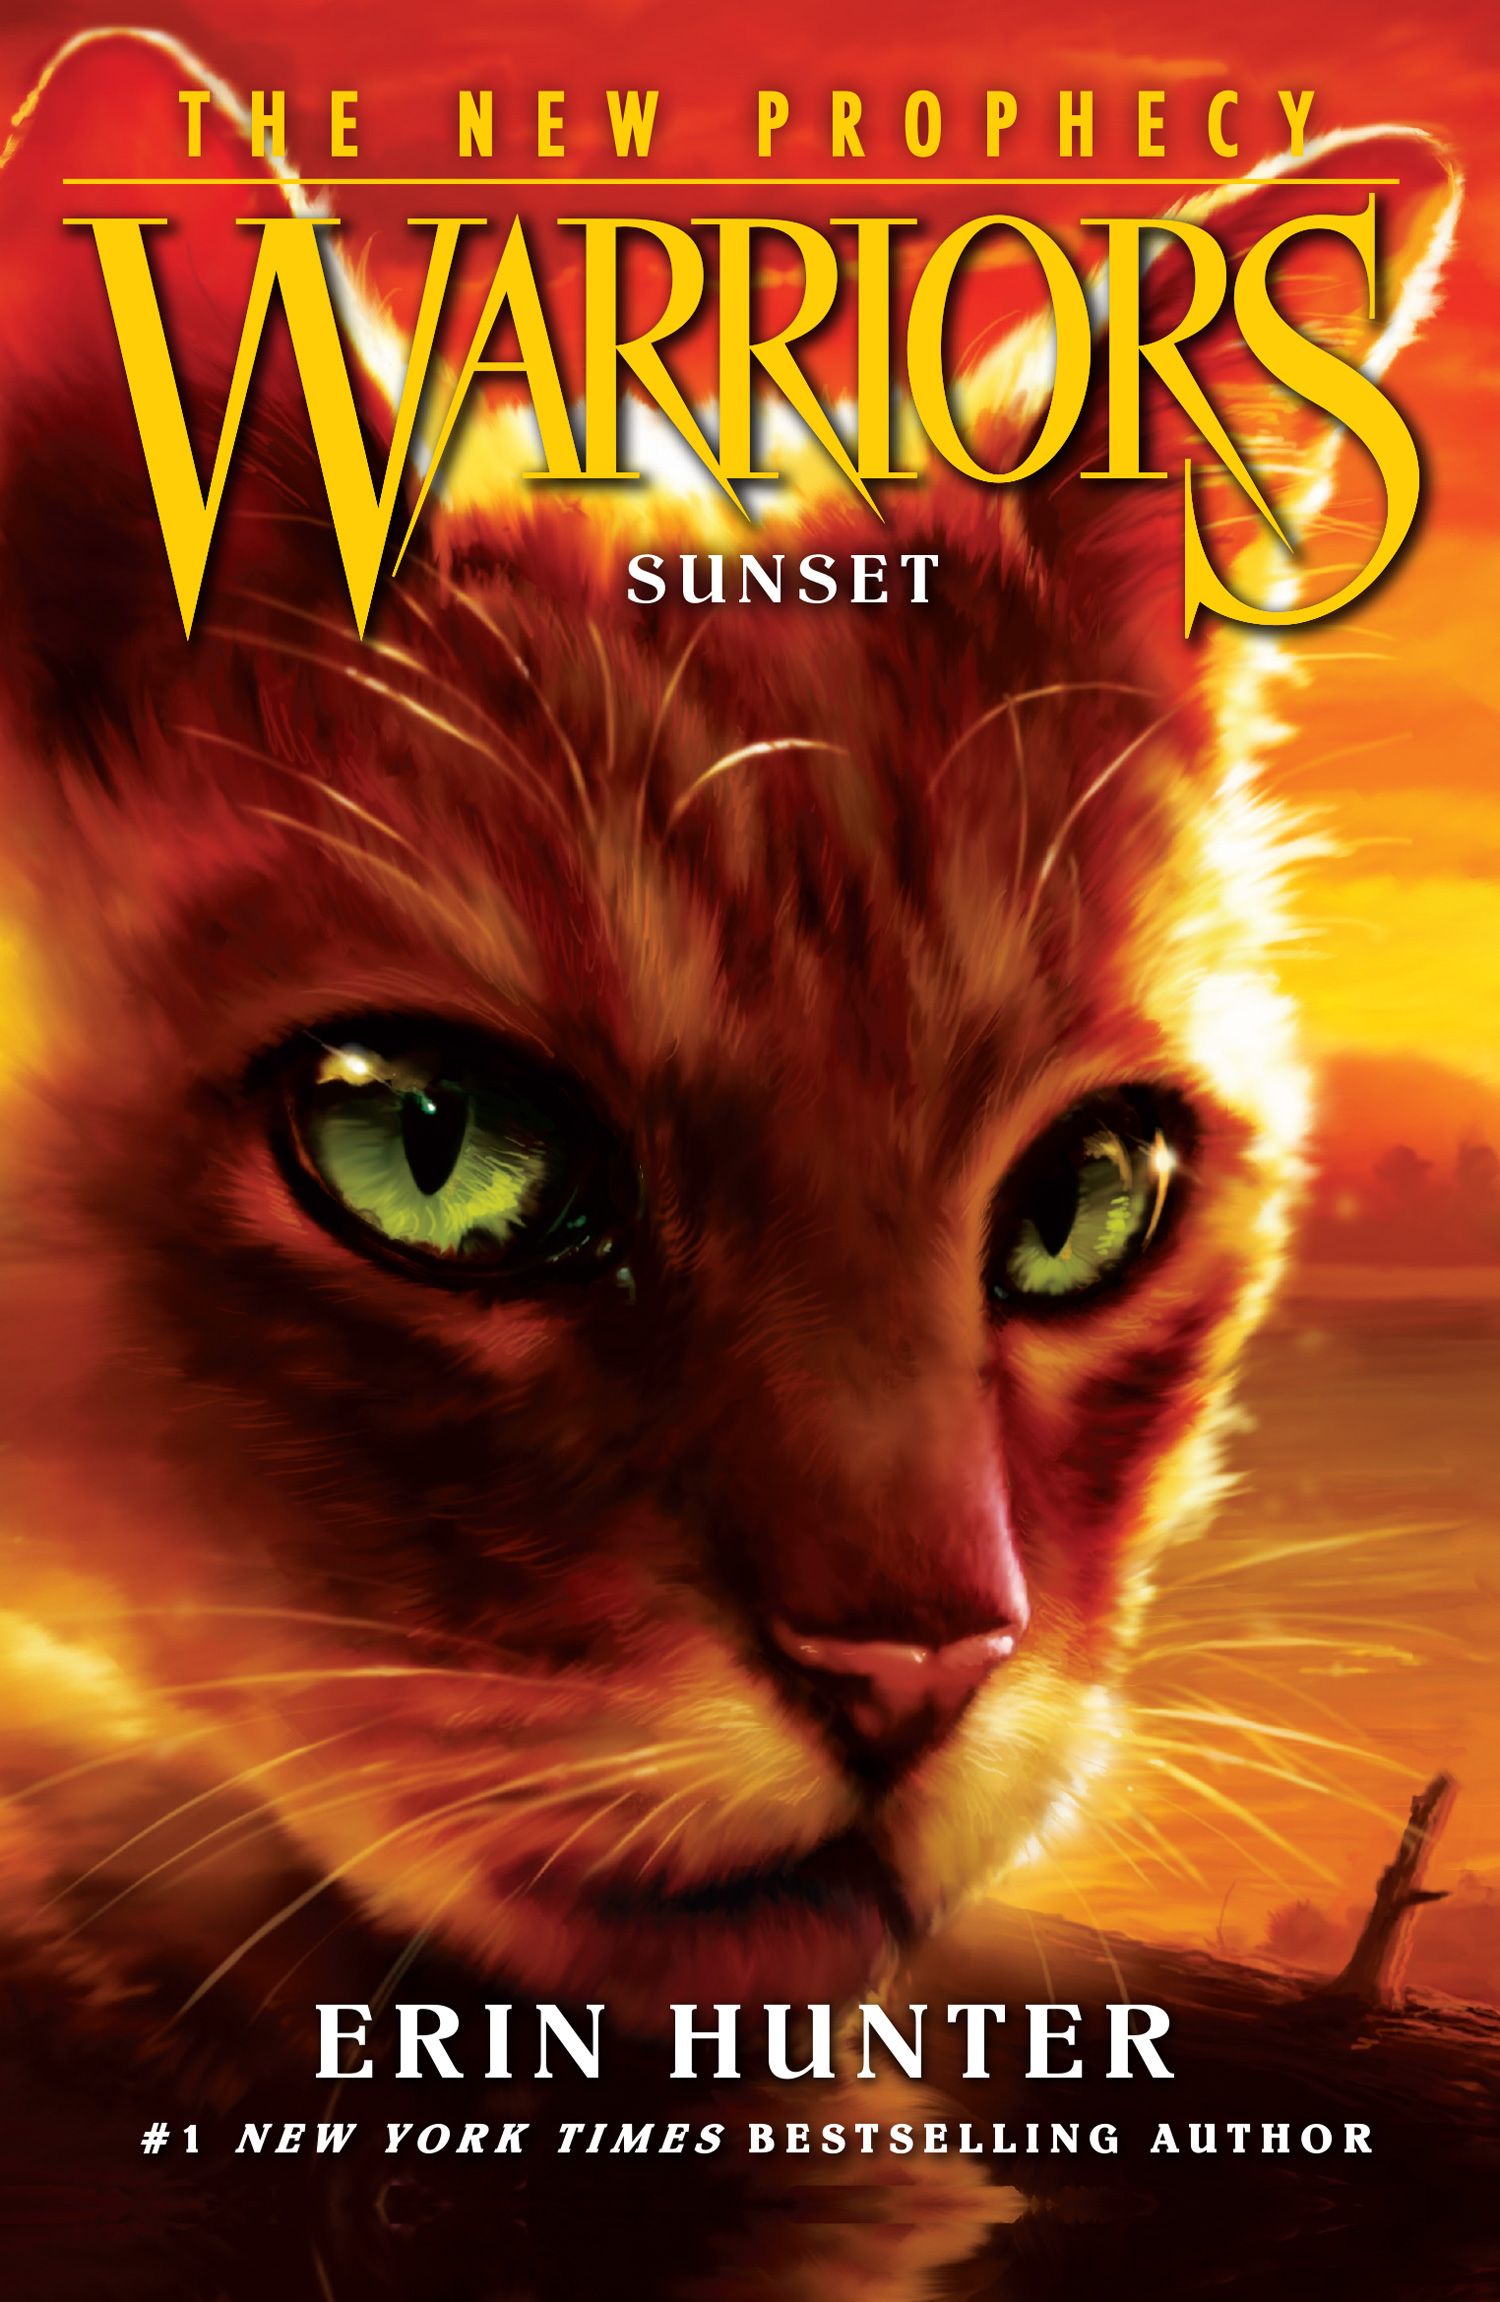 Into the Wild - (Warriors: The Prophecies Begin) by Erin Hunter (Hardcover)